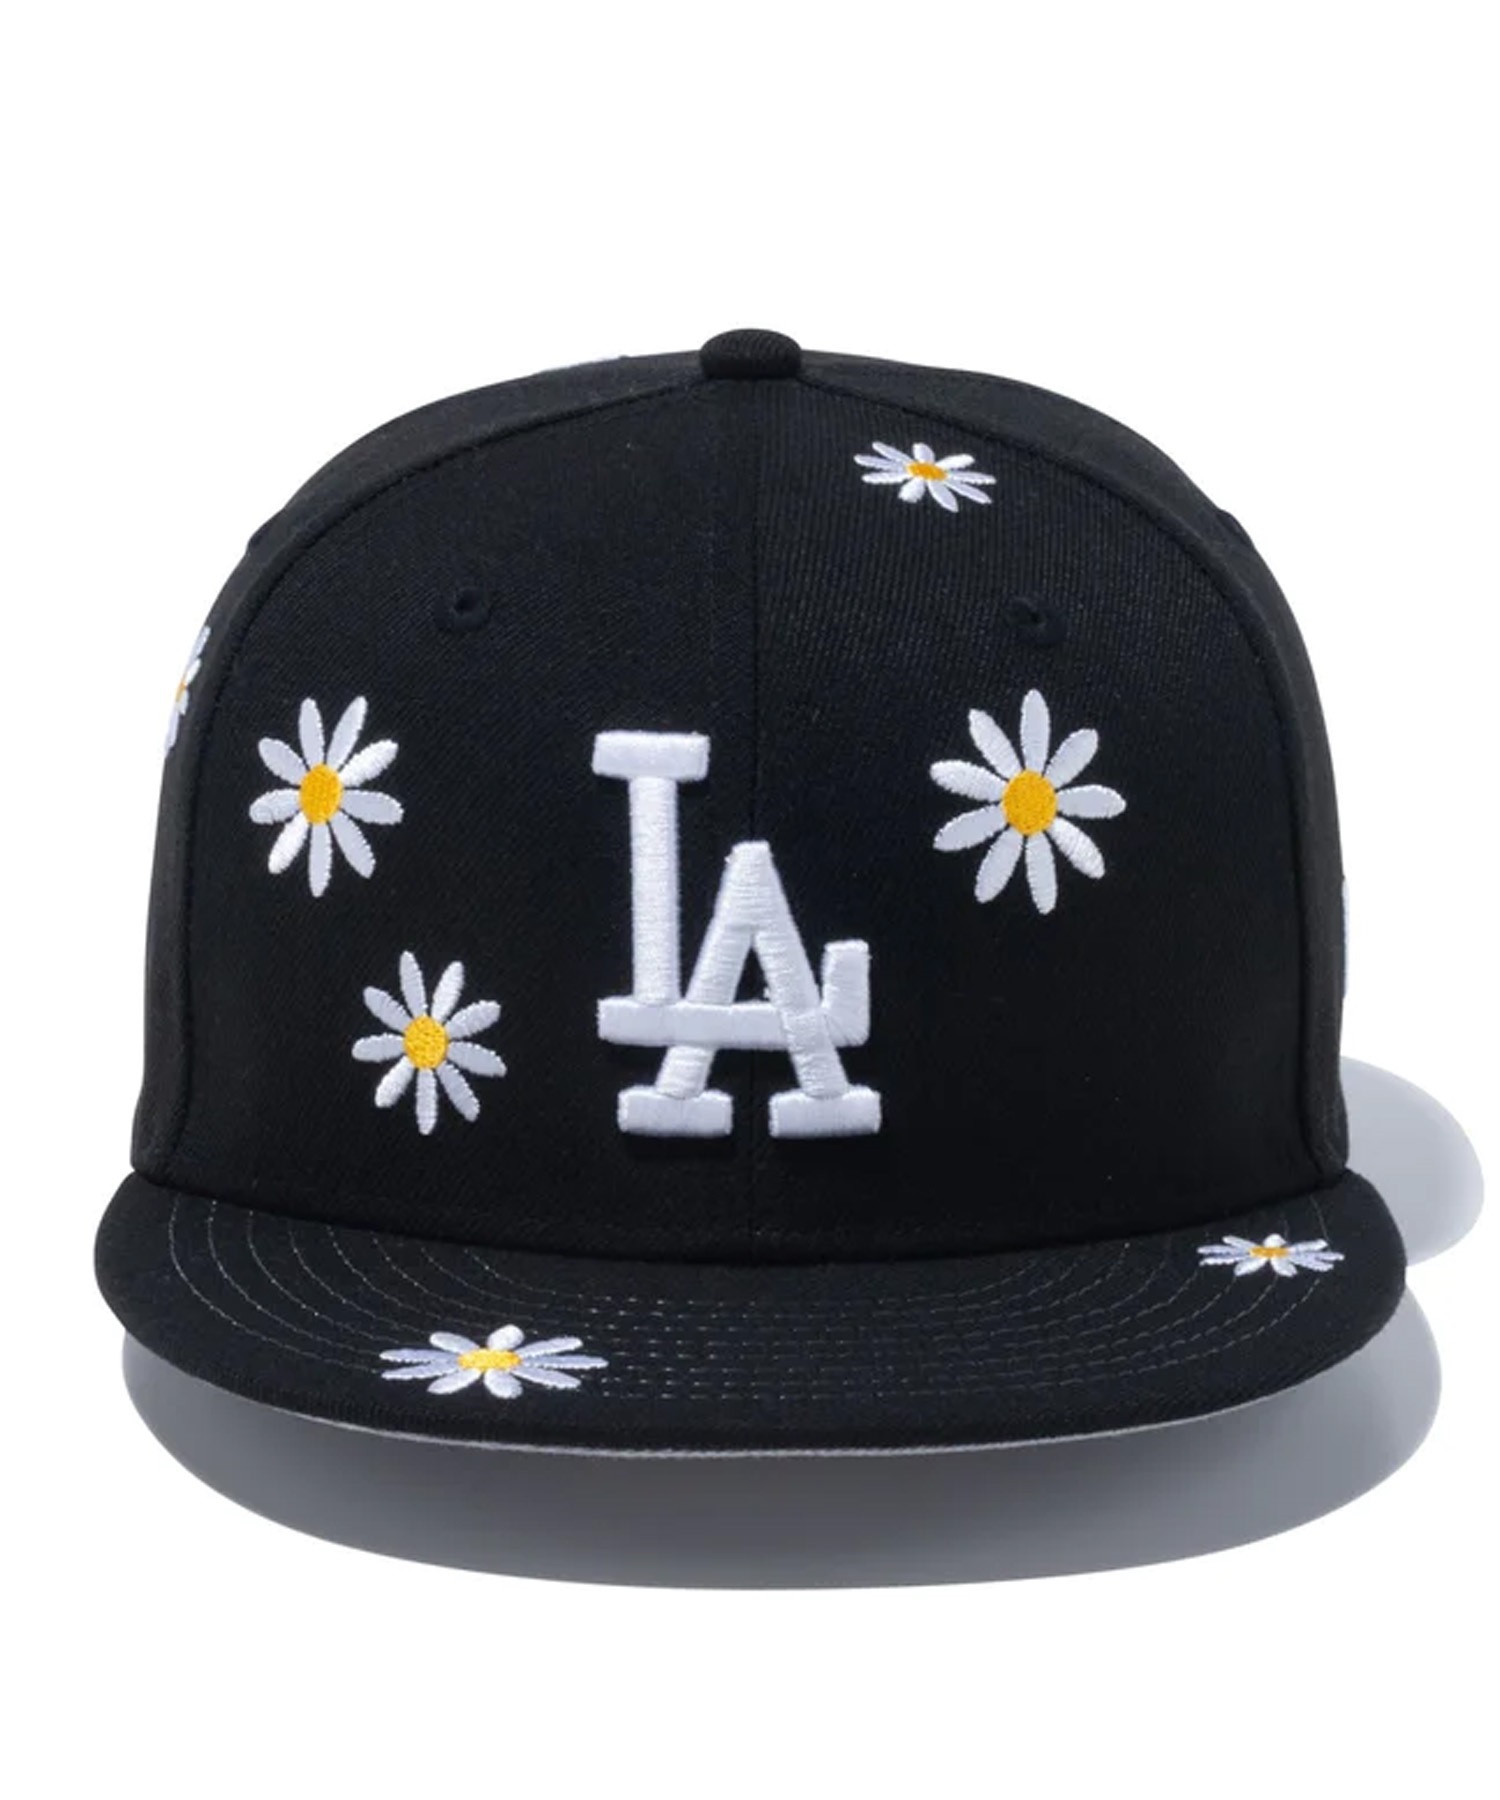 NEW ERA ニューエラ Youth 9FIFTY MLB Flower Embroidery ロサンゼルス 